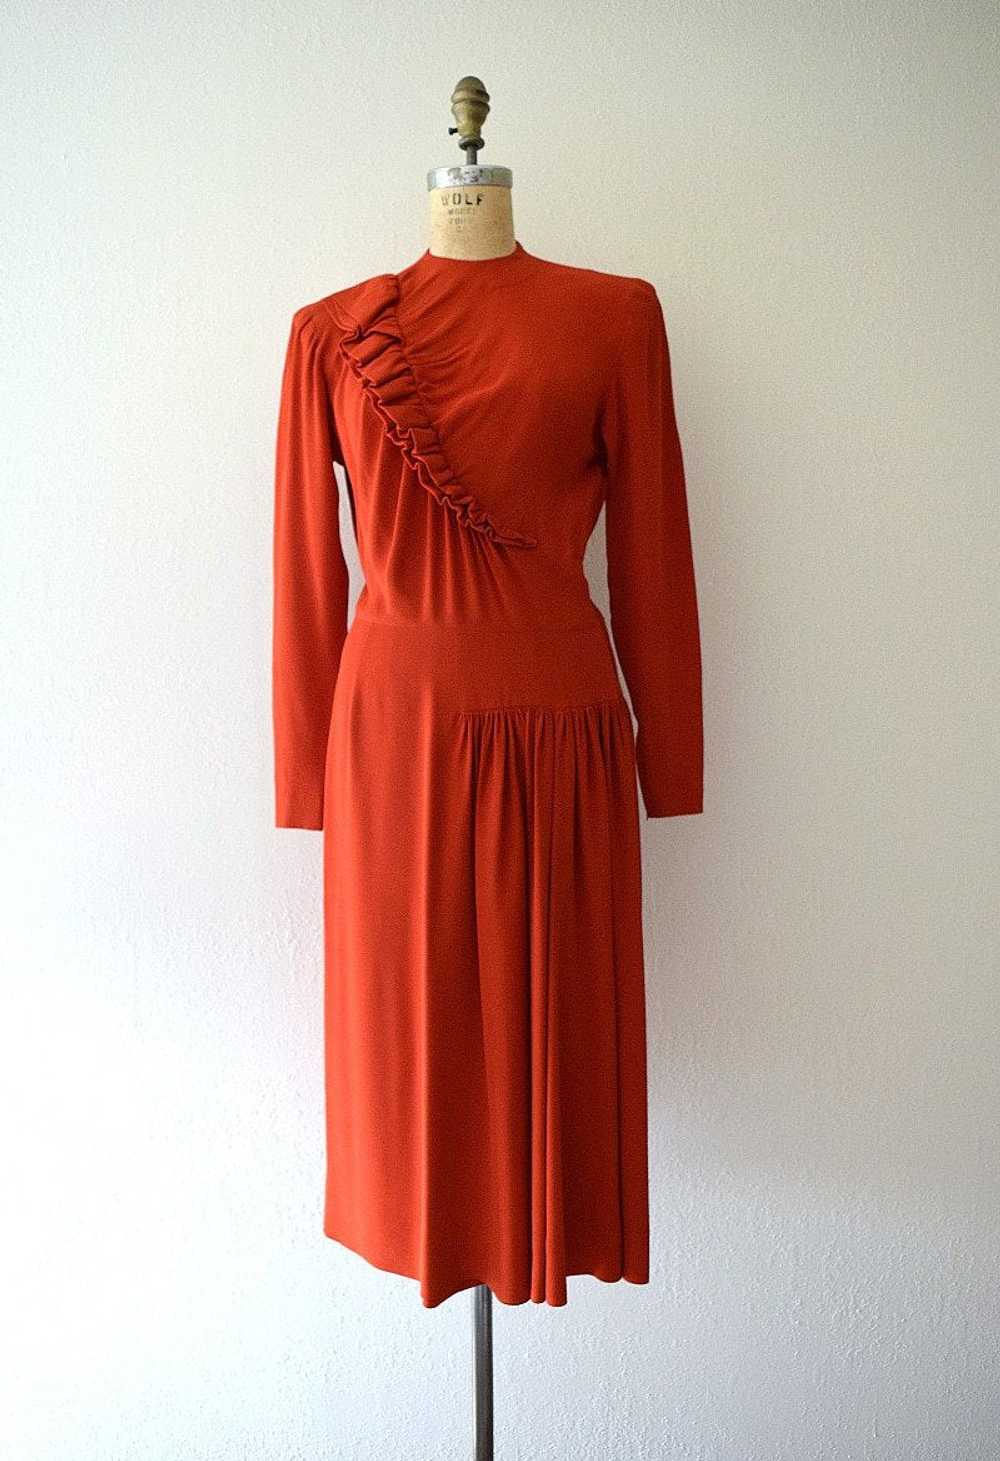 Red 1940s dress . vintage 40s ruffled rayon dress - image 2